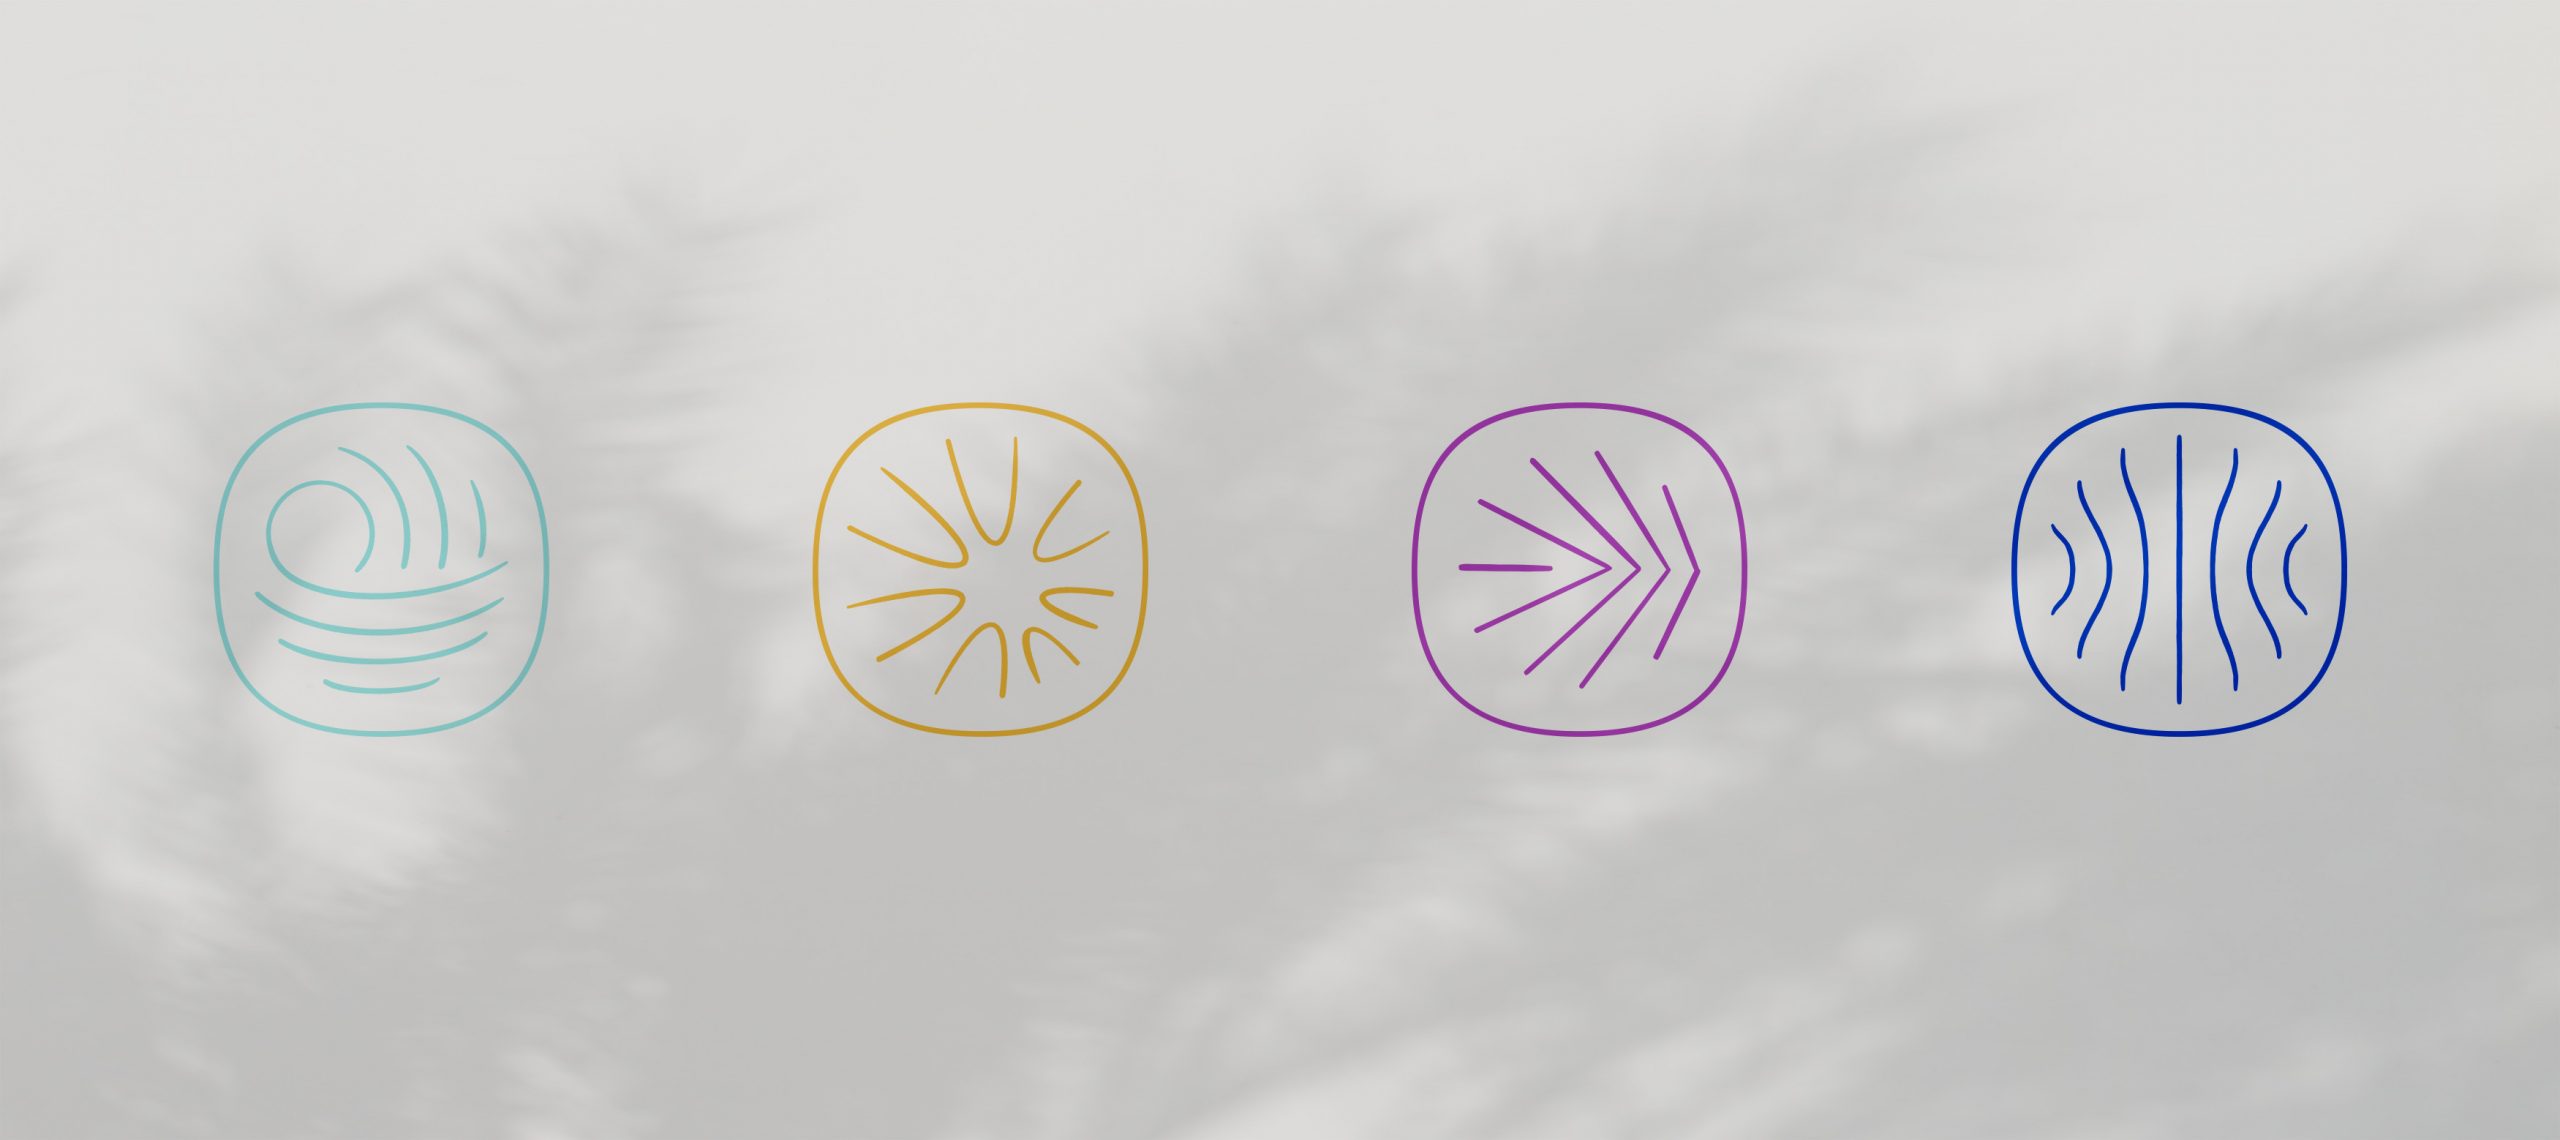 Affinity-Design-Principles-icons